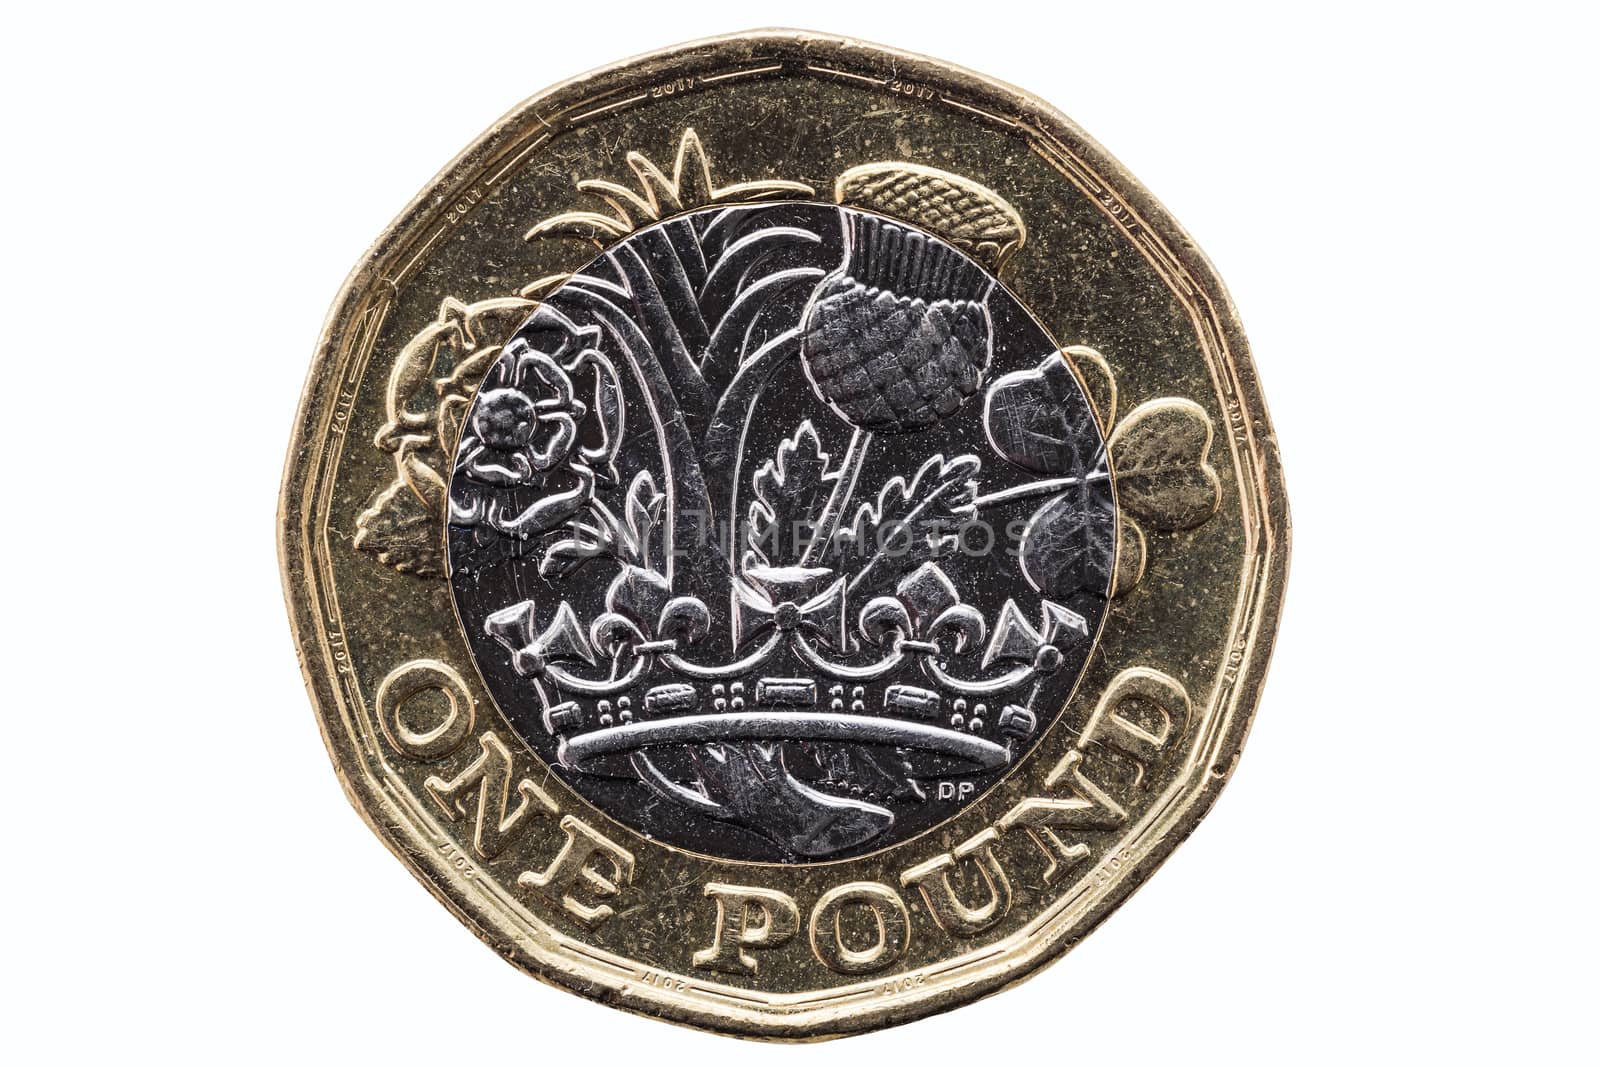 New one pound coin of England UK by ant